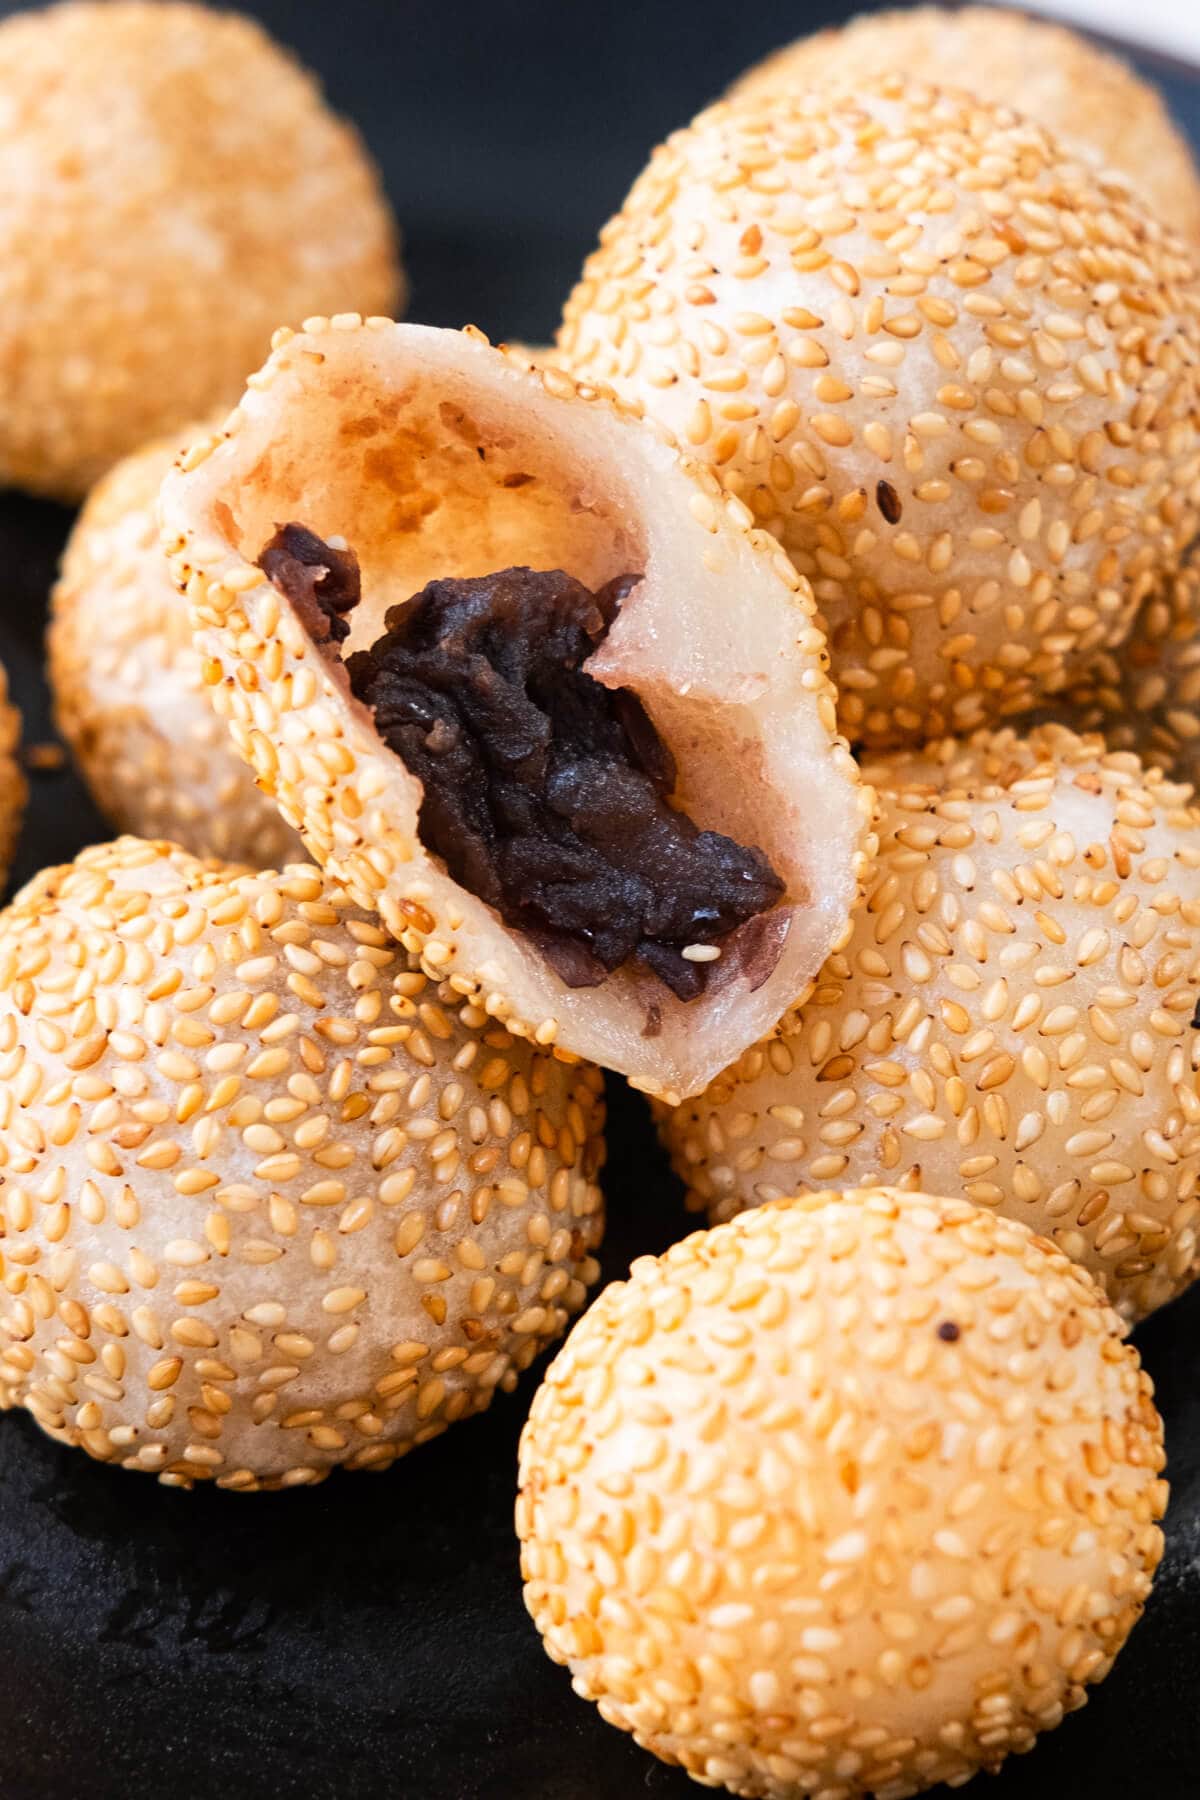 A half opened sesame coated ball with red bean paste filling inside surrounded by multiple sesame balls. 